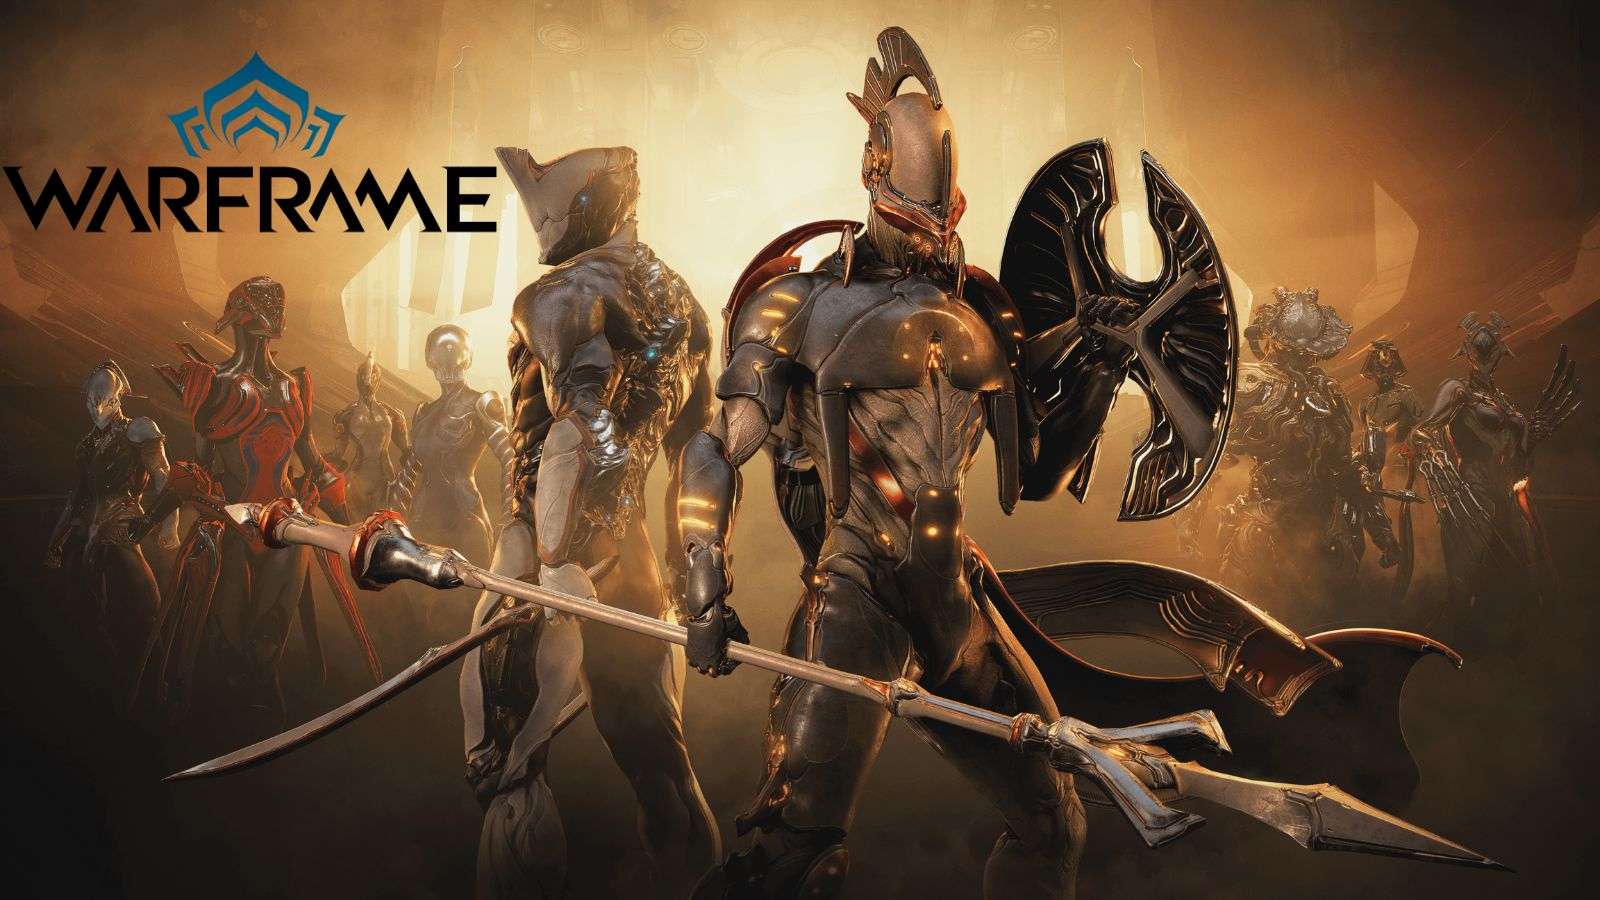 Warframe characters posing with melee weapons